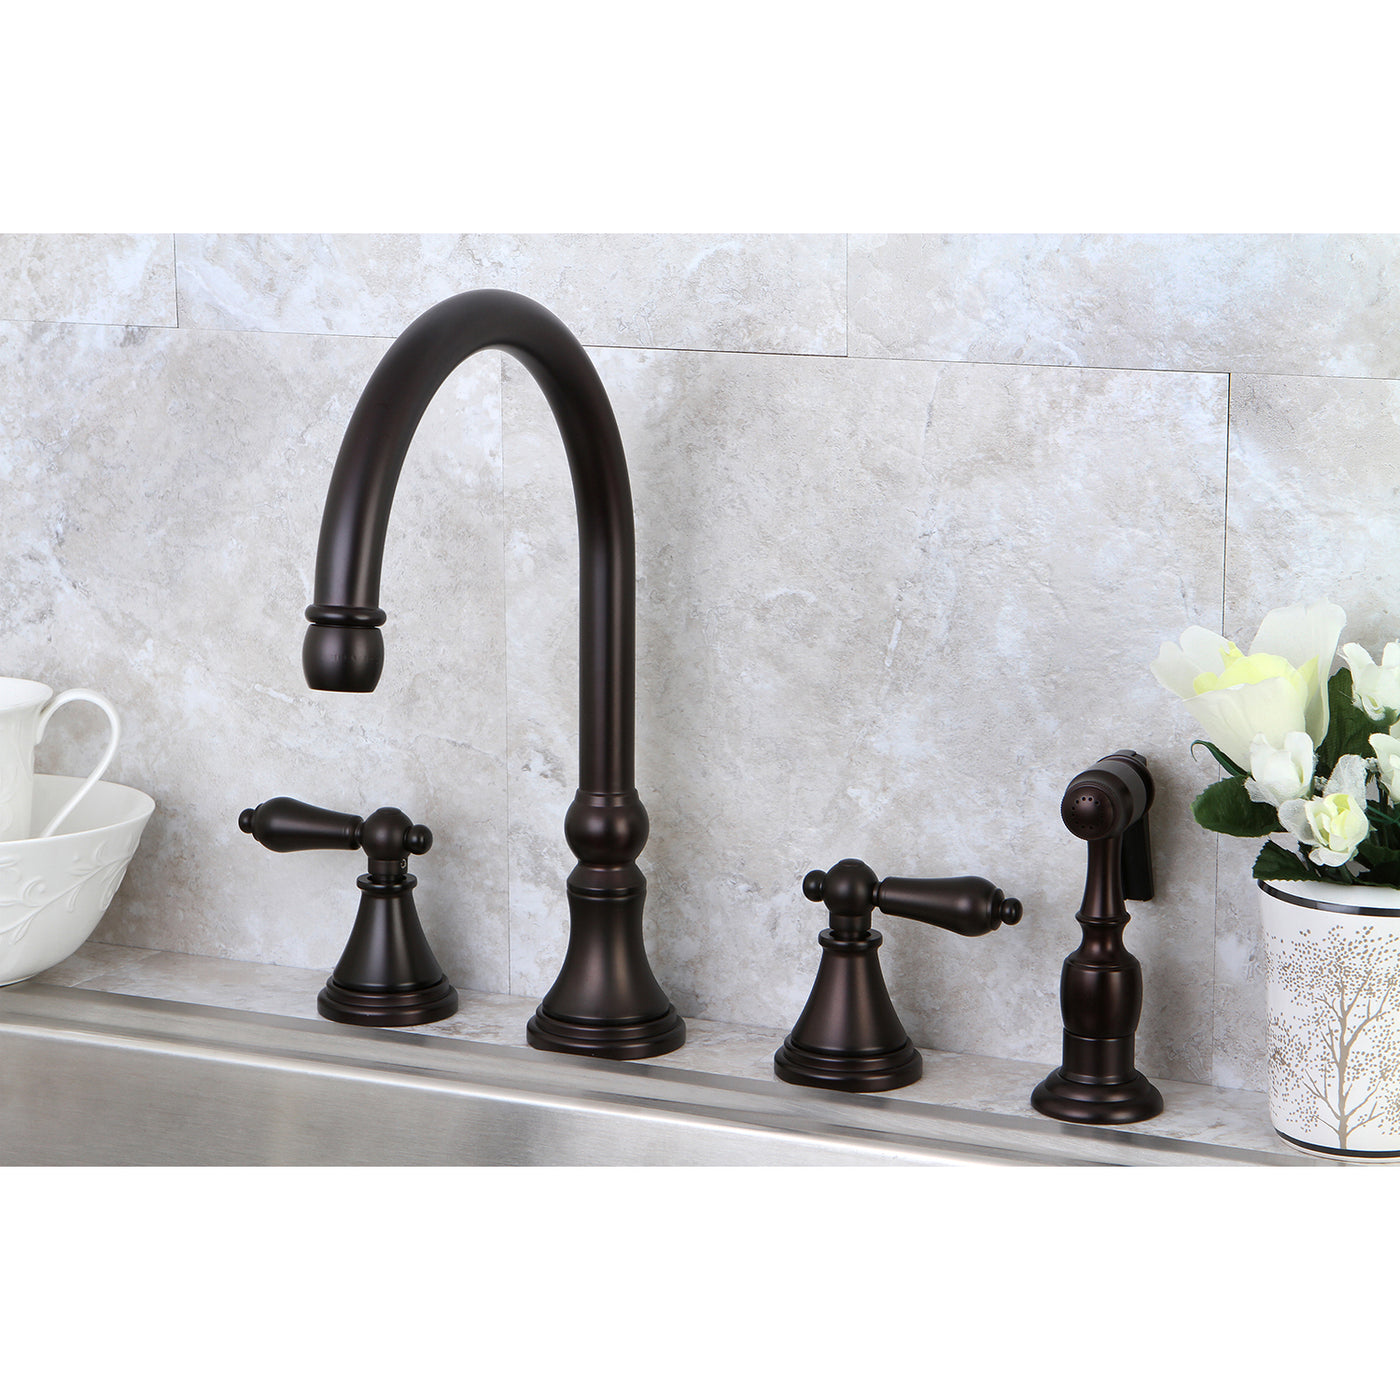 Elements of Design ES2795ALBS Widespread Kitchen Faucet with Brass Sprayer, Oil Rubbed Bronze